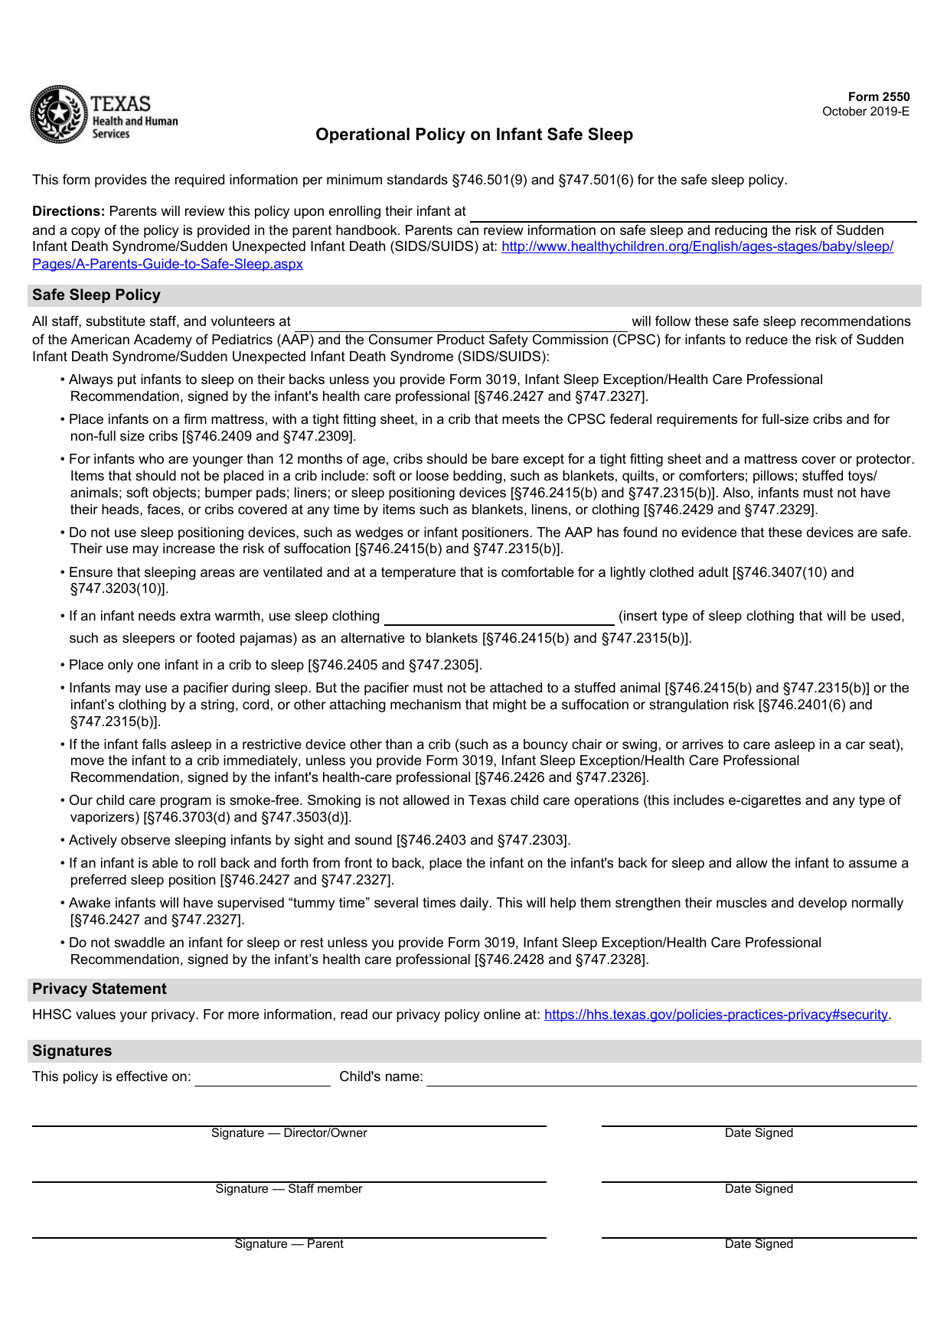 Form 2550 Operational Policy on Infant Safe Sleep - Texas, Page 1